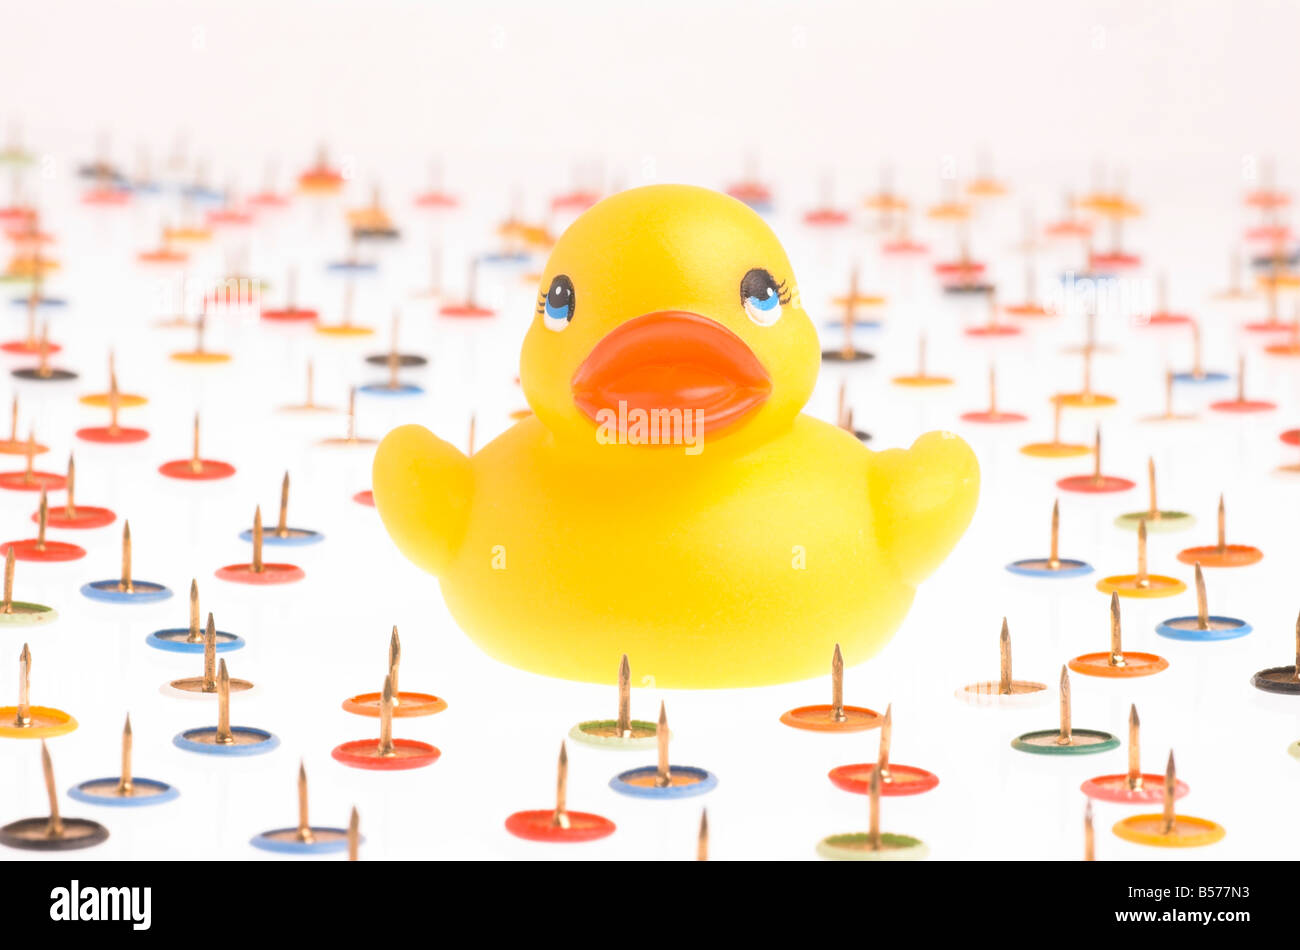 A rubber duck surrounded by thumb tacks Stock Photo